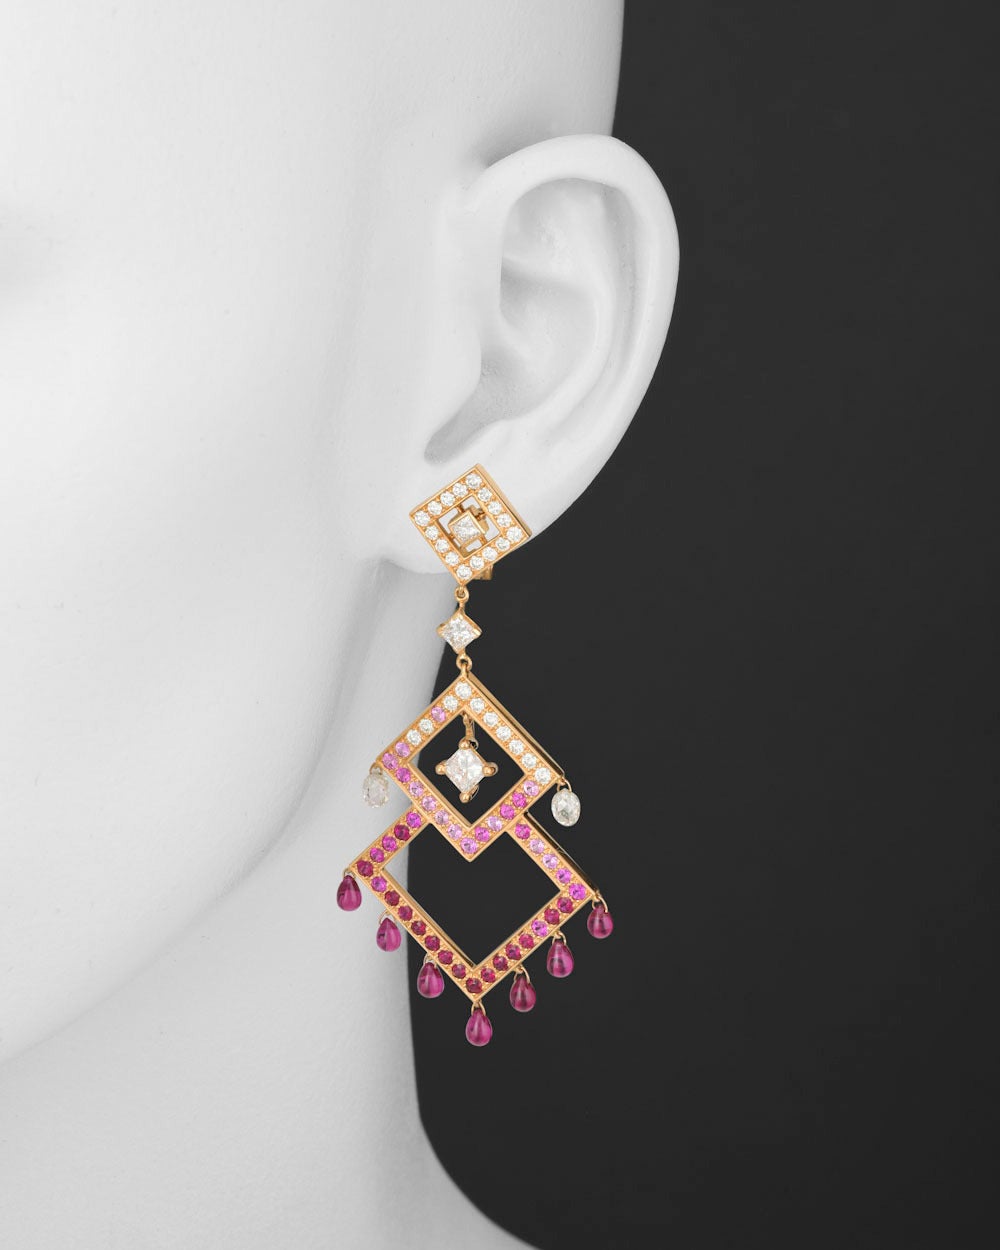 These stunning and dramatic chandelier earrings are composed of three graduated diamond-shaped frames, set with a combination of diamonds, rubies and pink sapphires, with individual diamond briolettes and ruby drops dangling gracefully from the